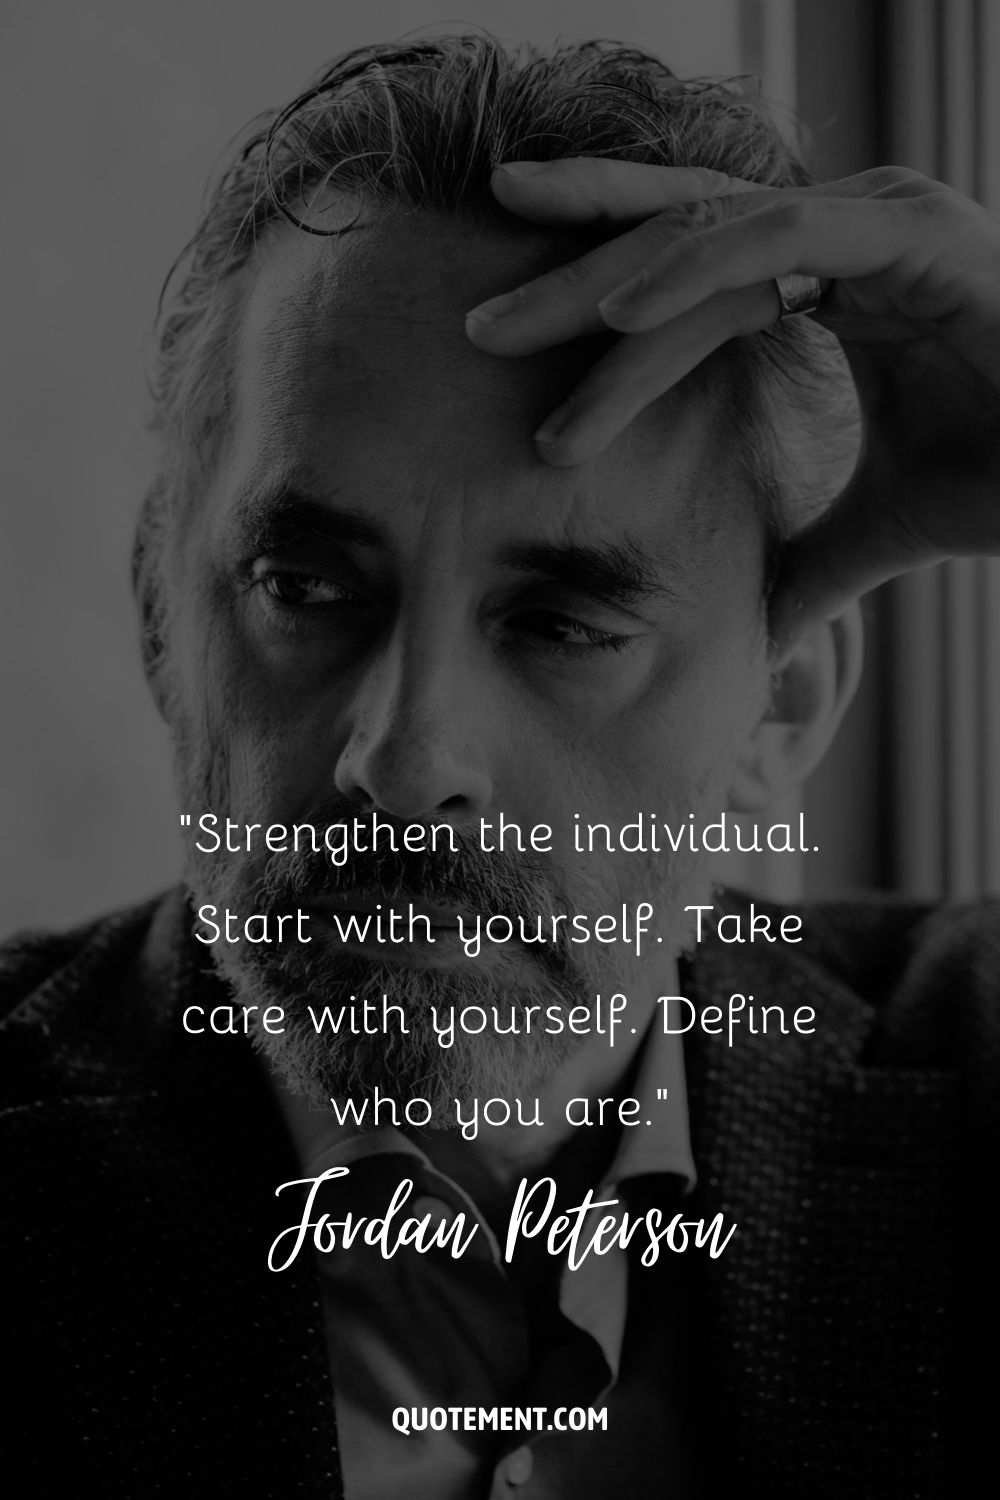 Strengthen the individual. Start with yourself. Take care with yourself. Define who you are